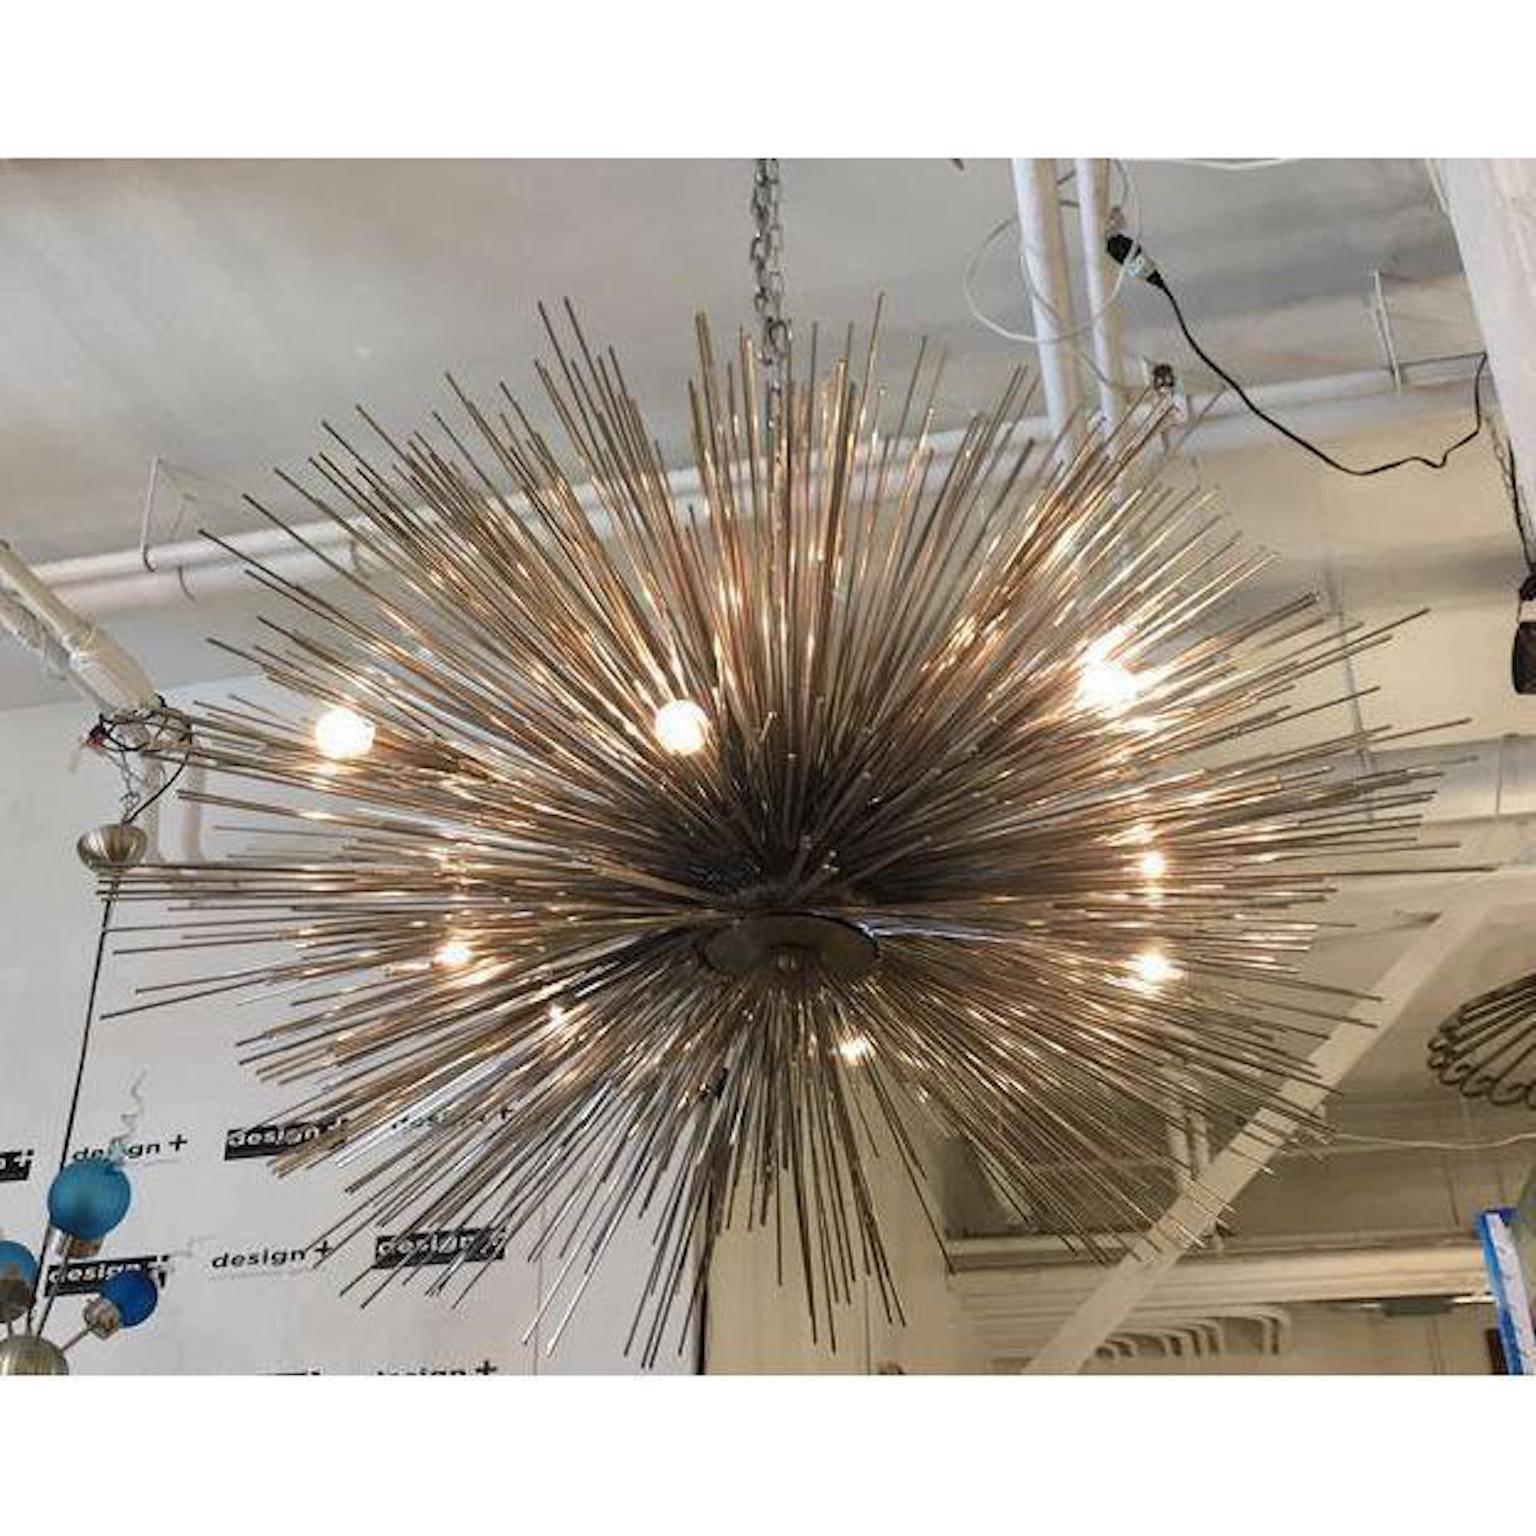 Design Plus Gallery has a eight-light lumière chandelier designed by Jean De Merry. This fixture boasts eight lights and a metallic urchin shape. This piece has a major Mid-Century Modern attitude and would shine in any home bending its design eye